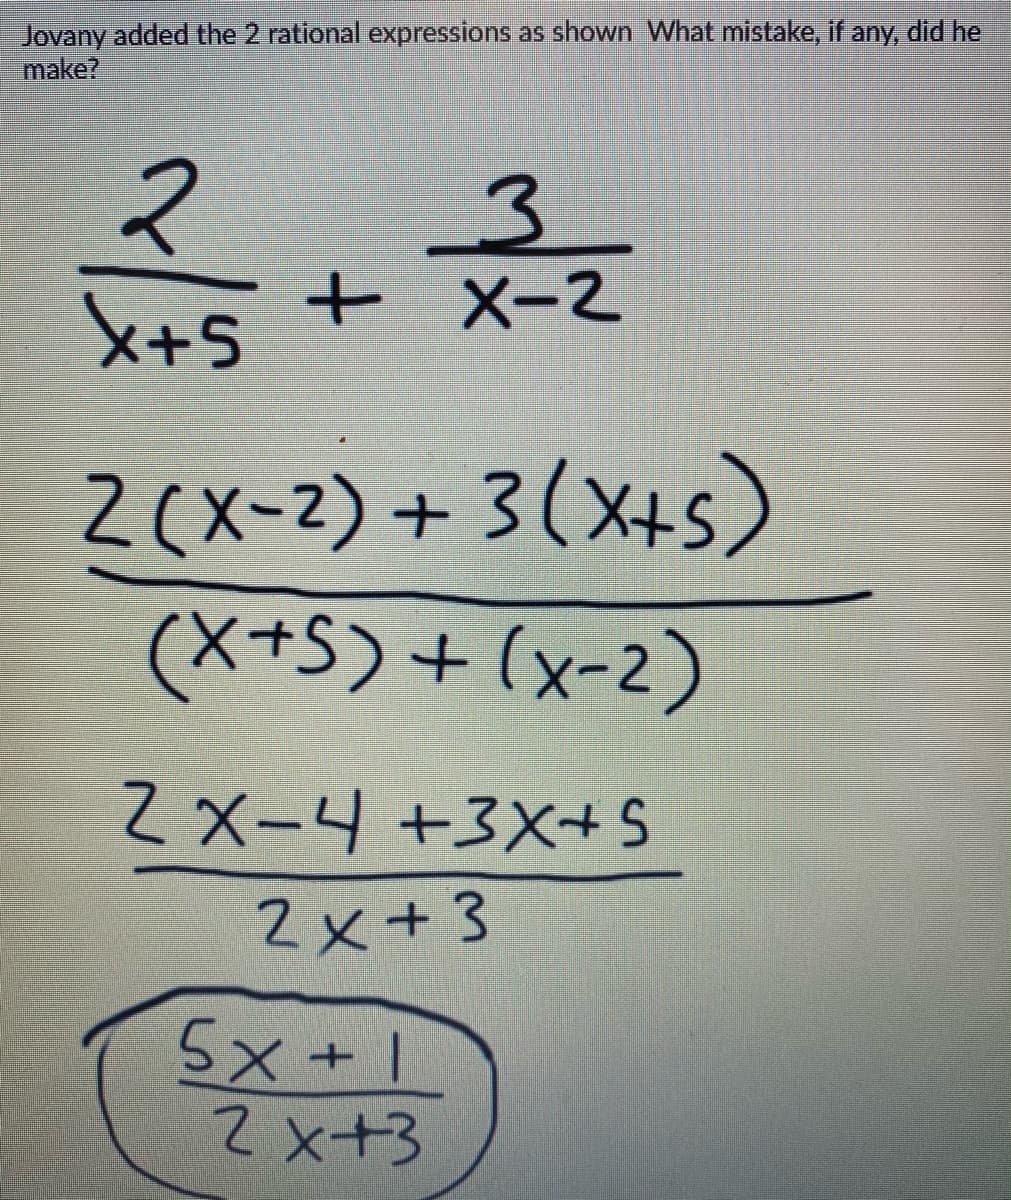 Jovany added the 2 rational expressions as shown What mistake, if any, did he
make?
マ
X+5
+ X-2
2(X-2) + 3(X+5)
(X+S) + (x-2)
Z X-4 +3X+S
2x+3
5x + |
2 x+3
